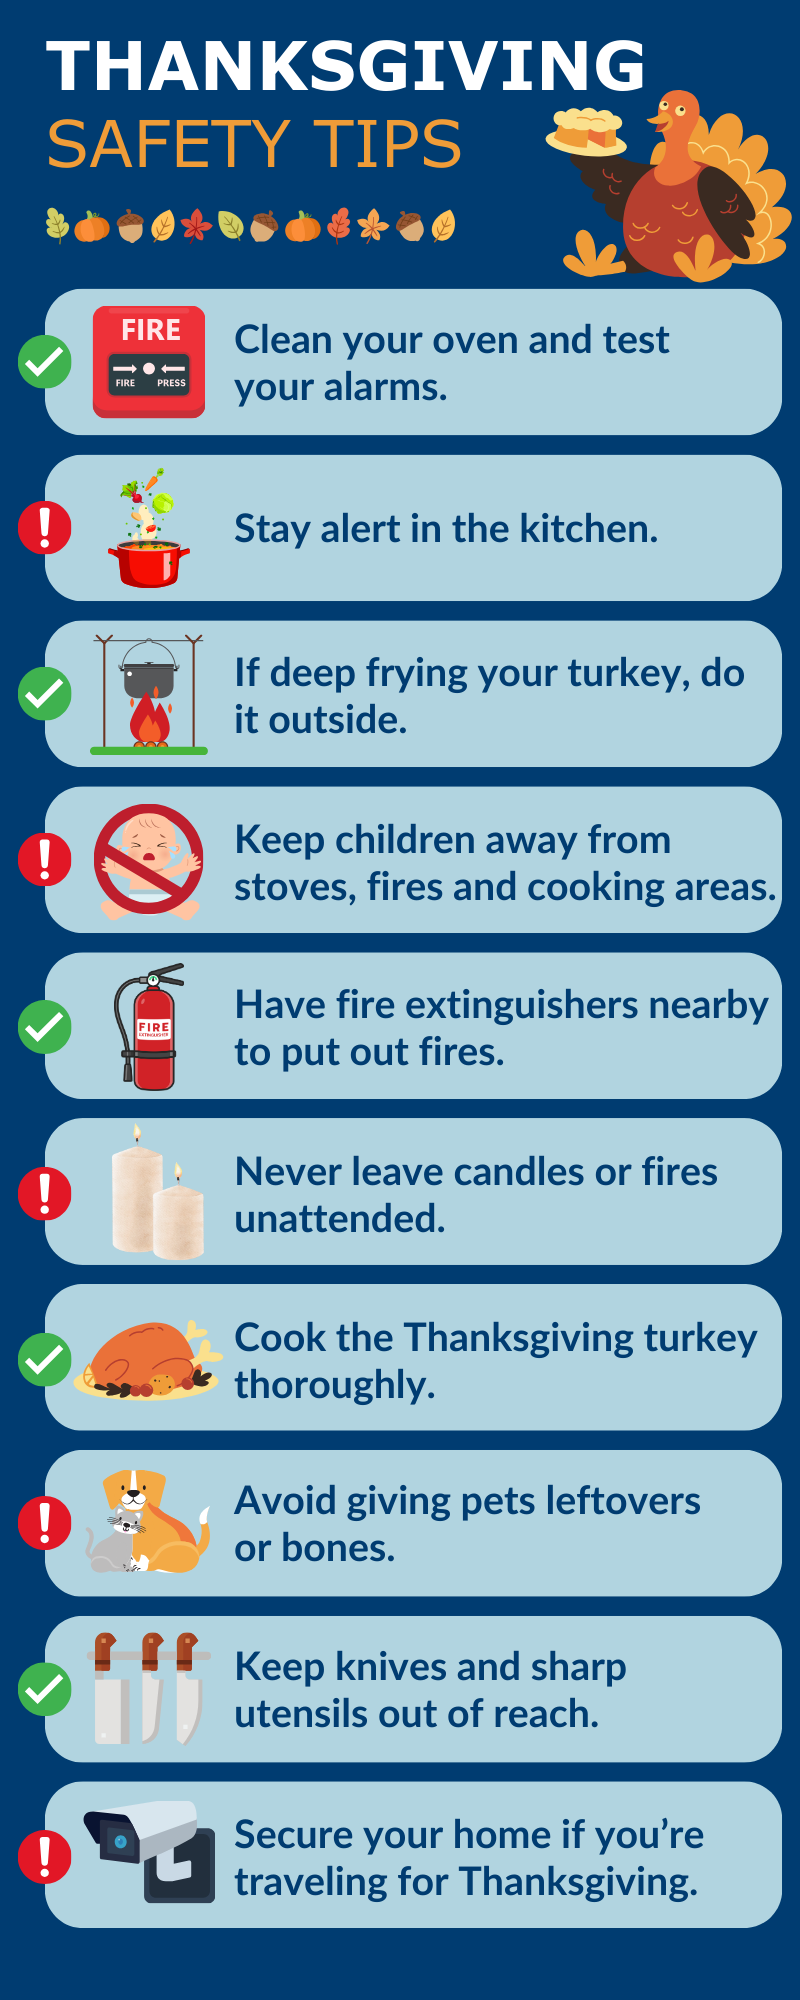 THANKSGIVING Safety Tips (1)